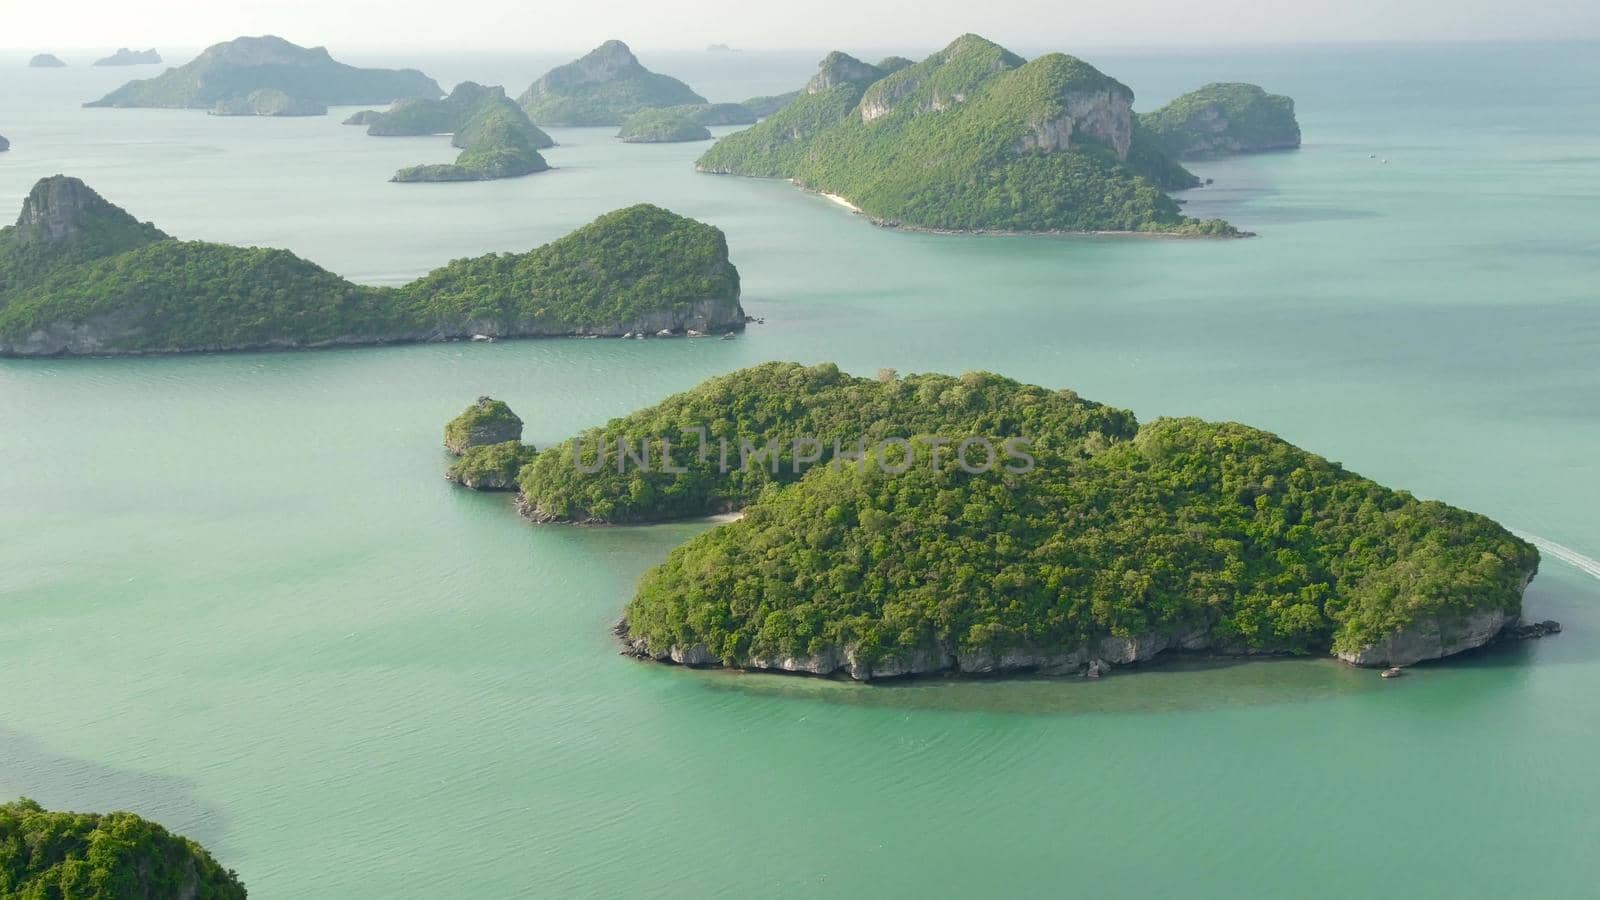 Bird eye panoramic aerial top view of Islands in ocean at Ang Thong National Marine Park near touristic Samui paradise tropical resort. Archipelago in the Gulf of Thailand. Idyllic natural background by DogoraSun